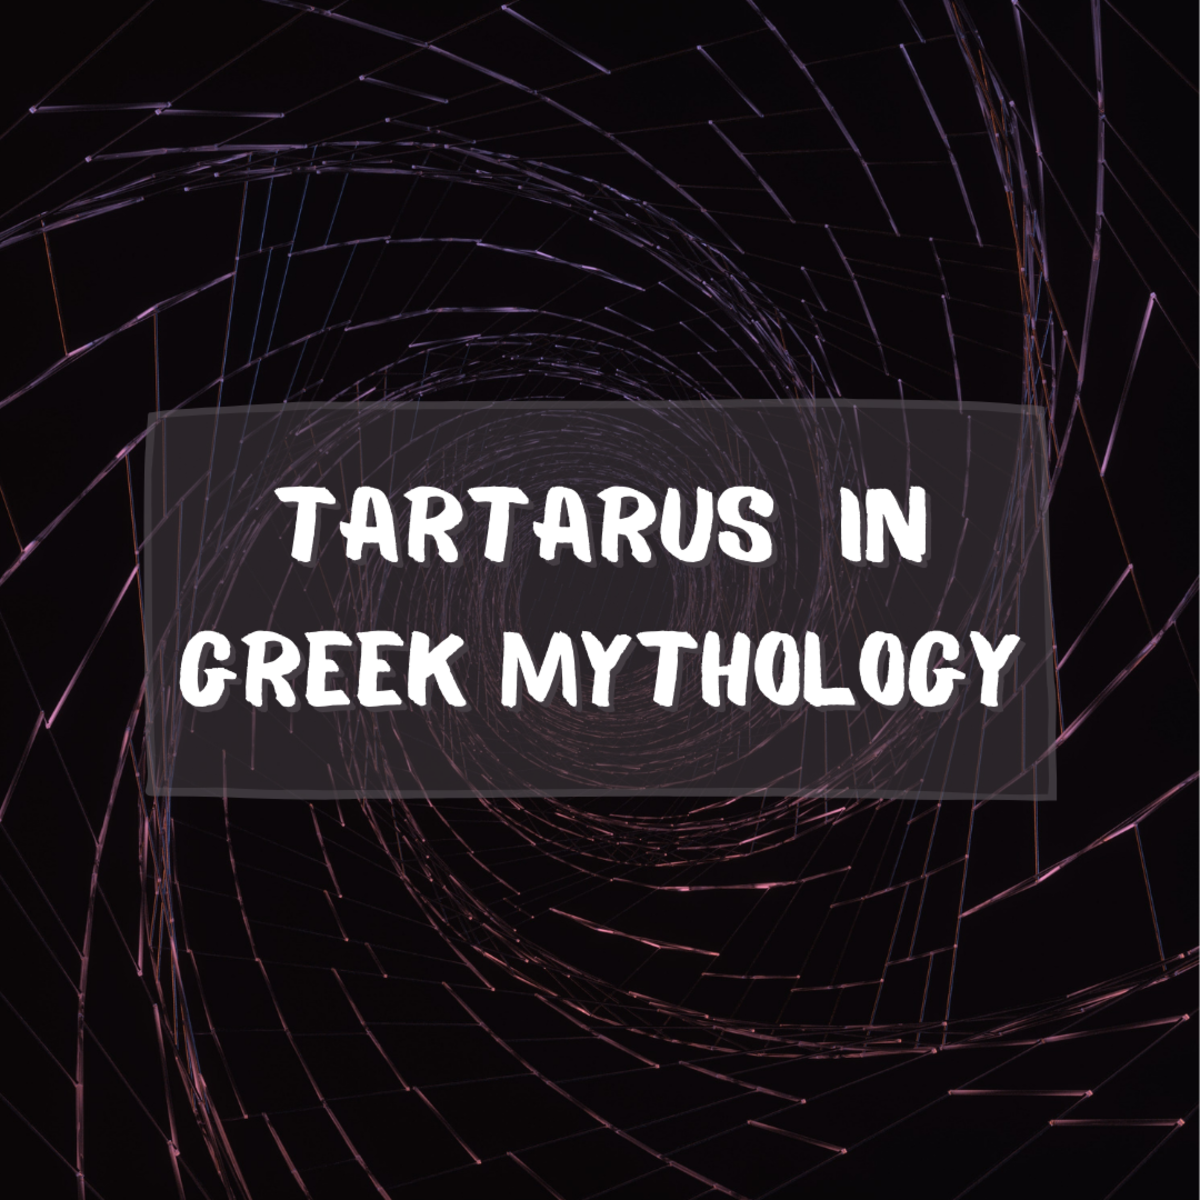 This article covers Tartarus, the deep abyss and prison of the Titans from Greek mythology. You will learn about important prisoners of Tartarus, such as Tantalus, Ixion and Sisyphus.